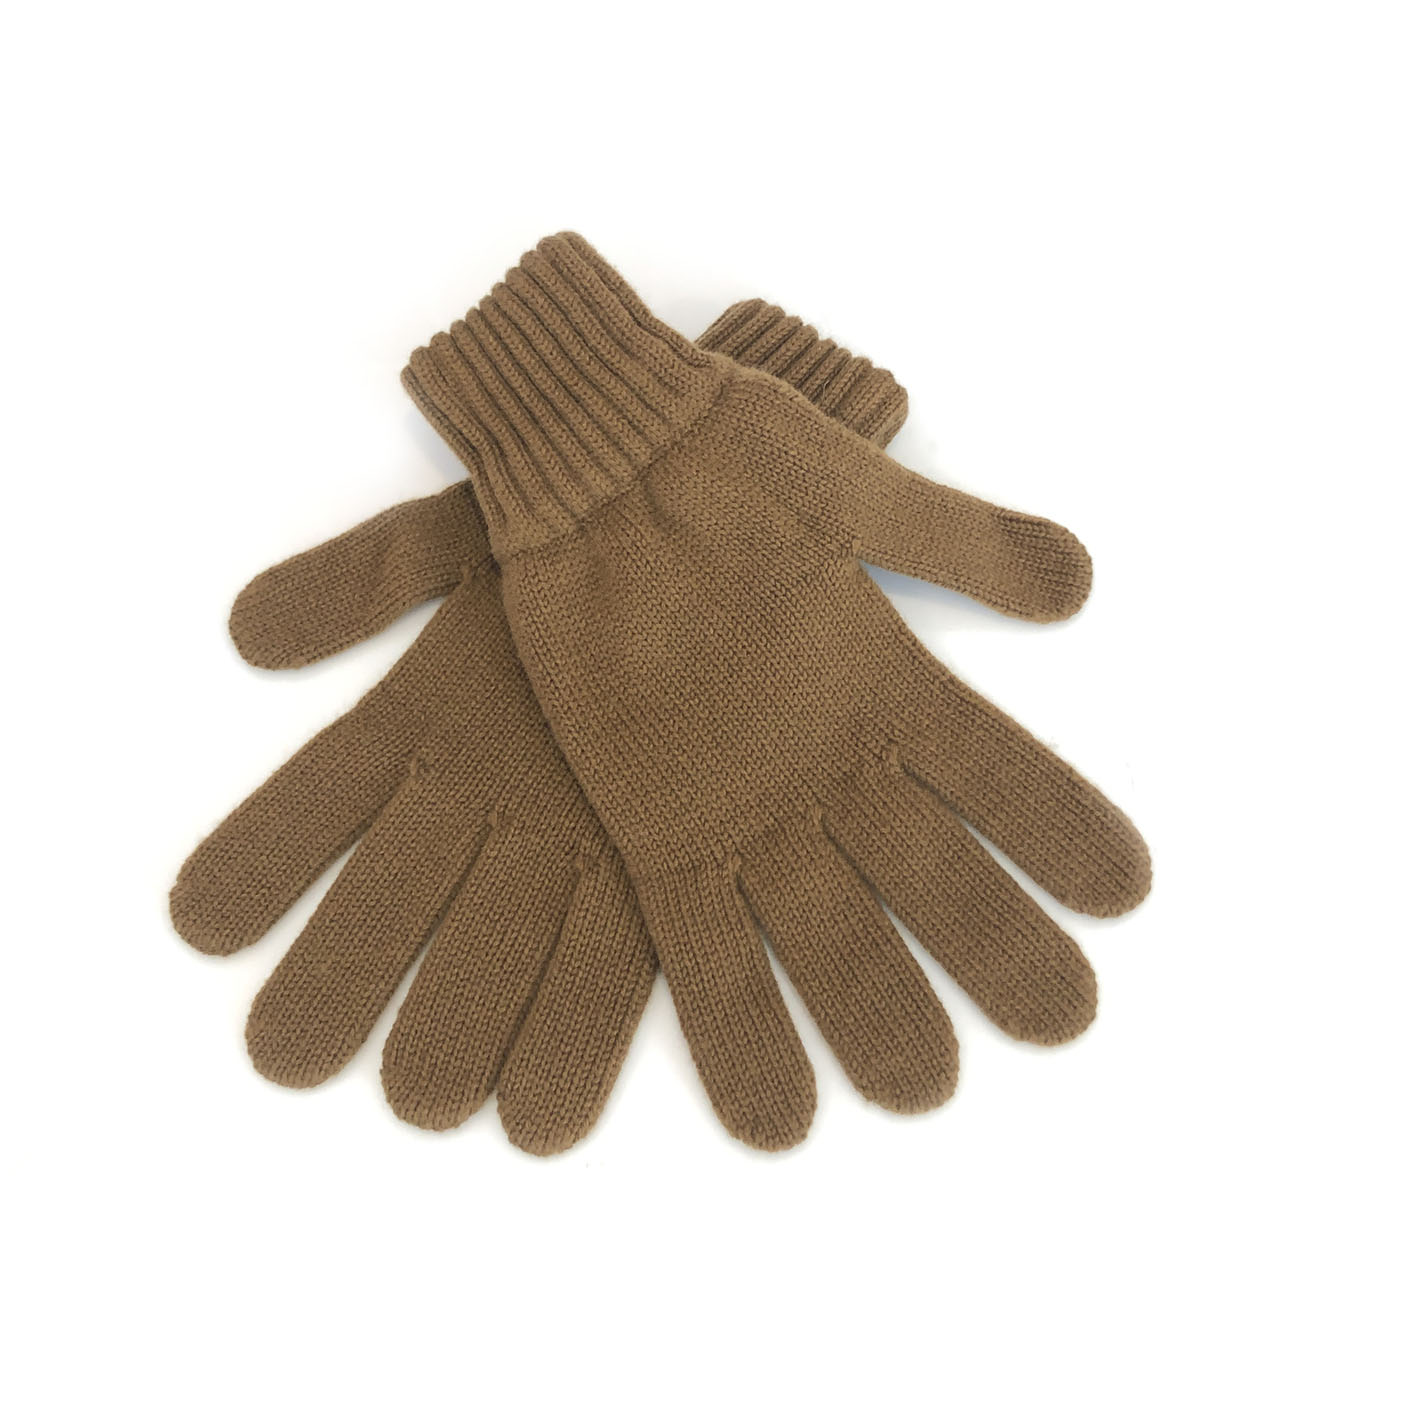 An image of Mens 100% Cashmere Gloves - Biscotti Light Brown